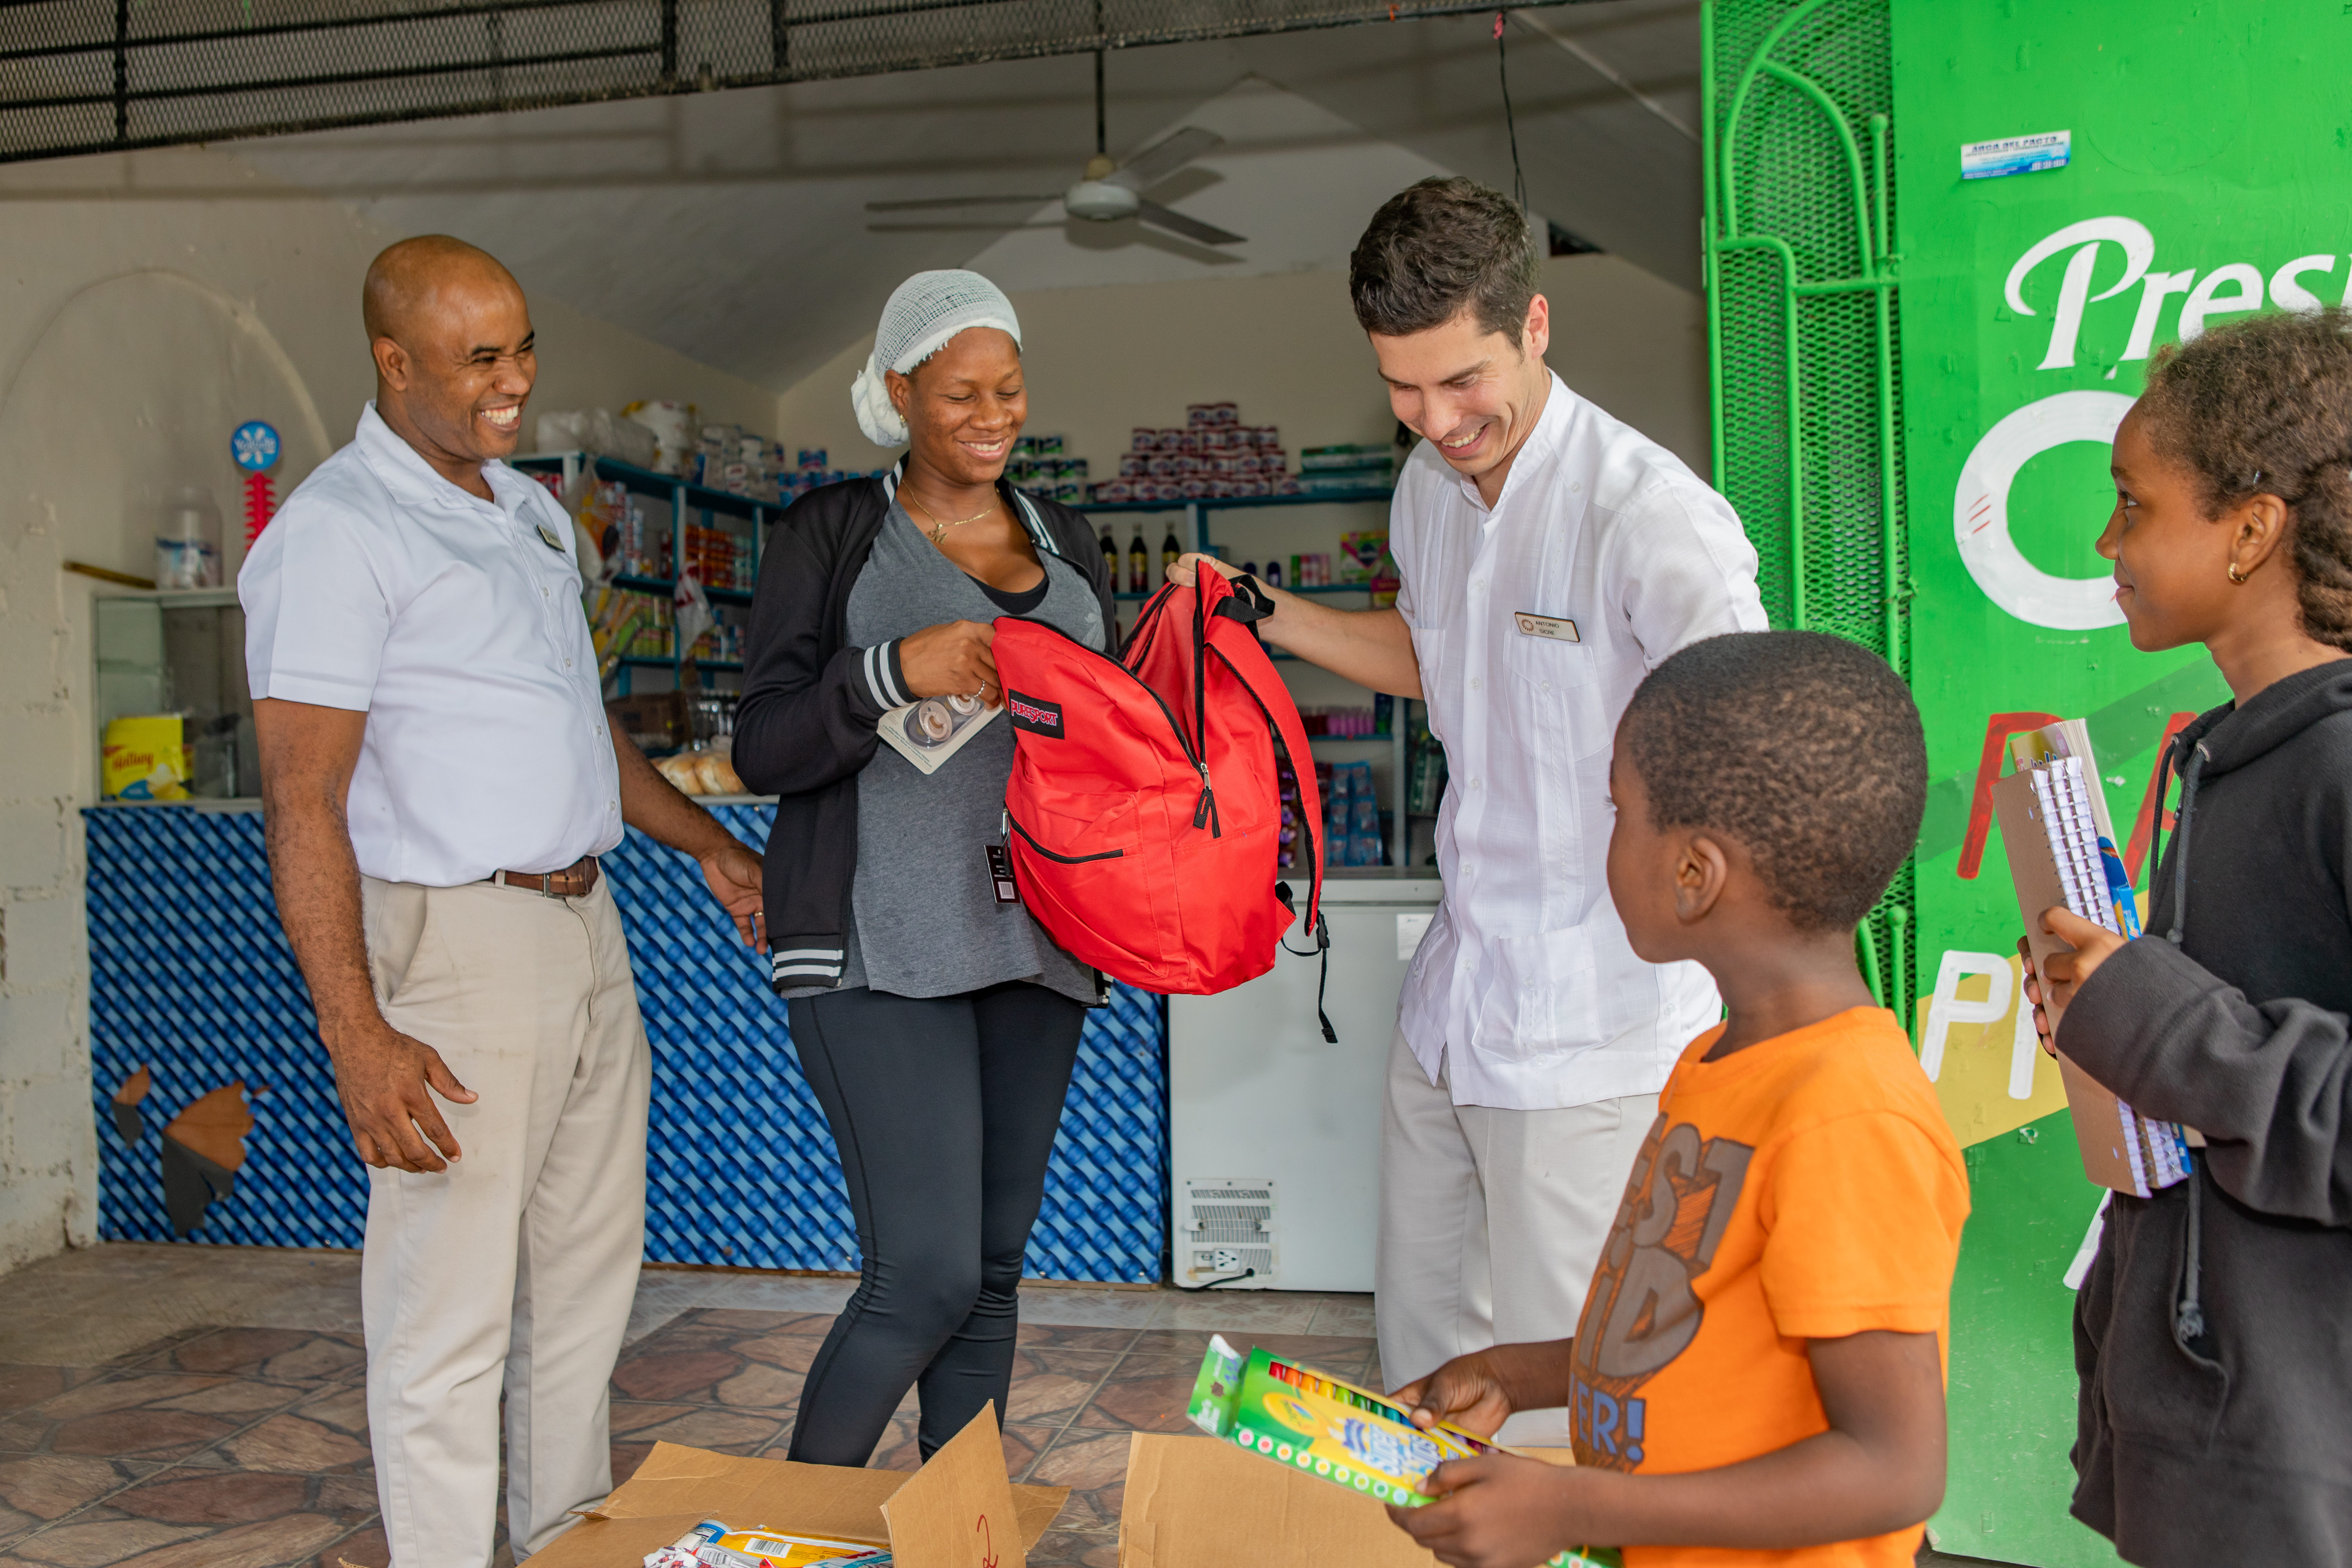 Vacation donations for the children of the Caribbean